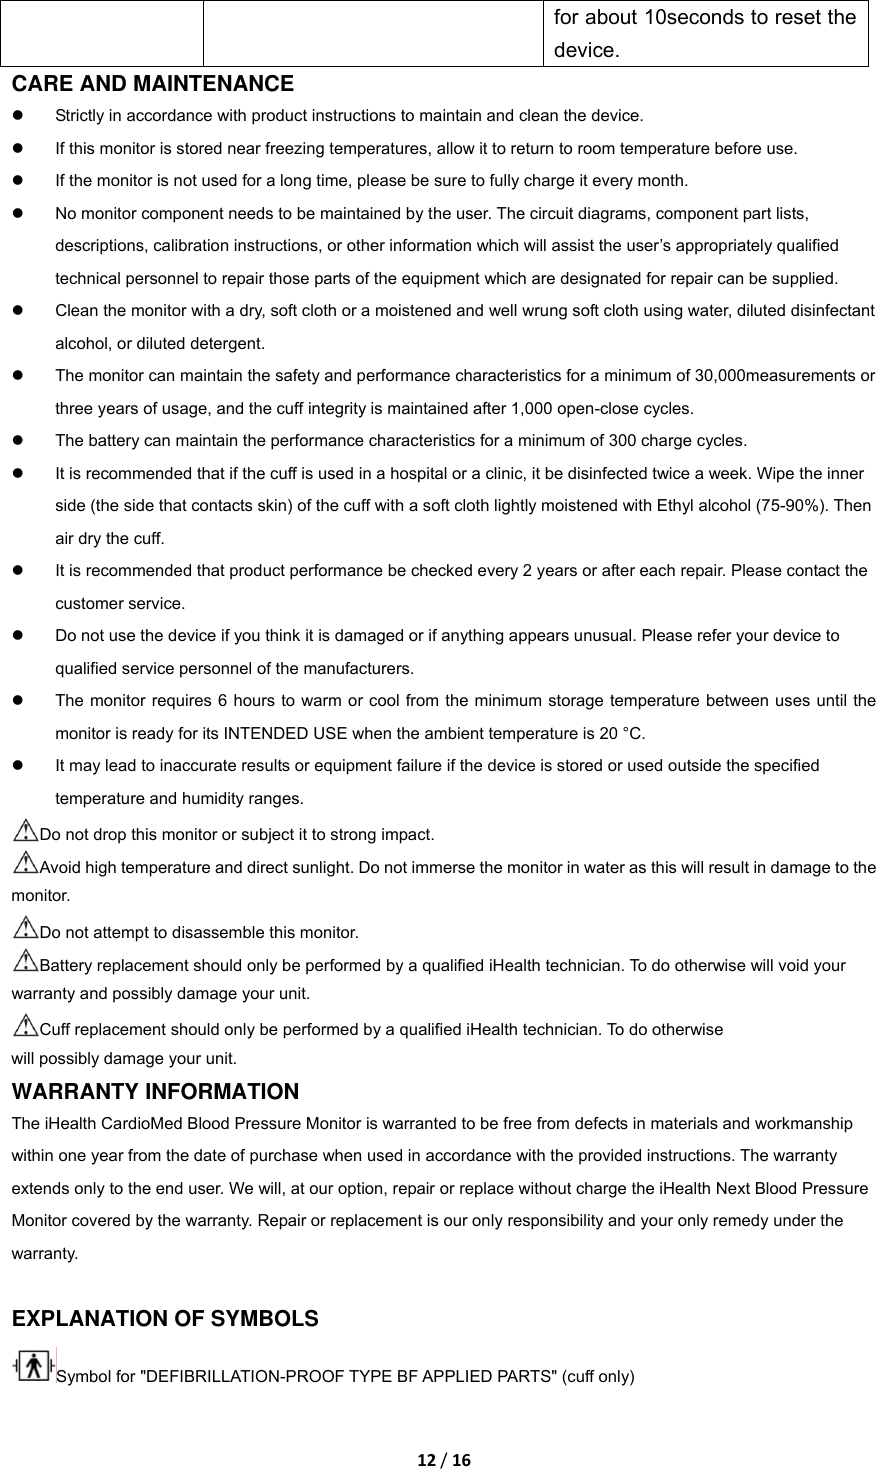 Page 12 of iHealth Labs ABP100 iHealth CardioMed User Manual